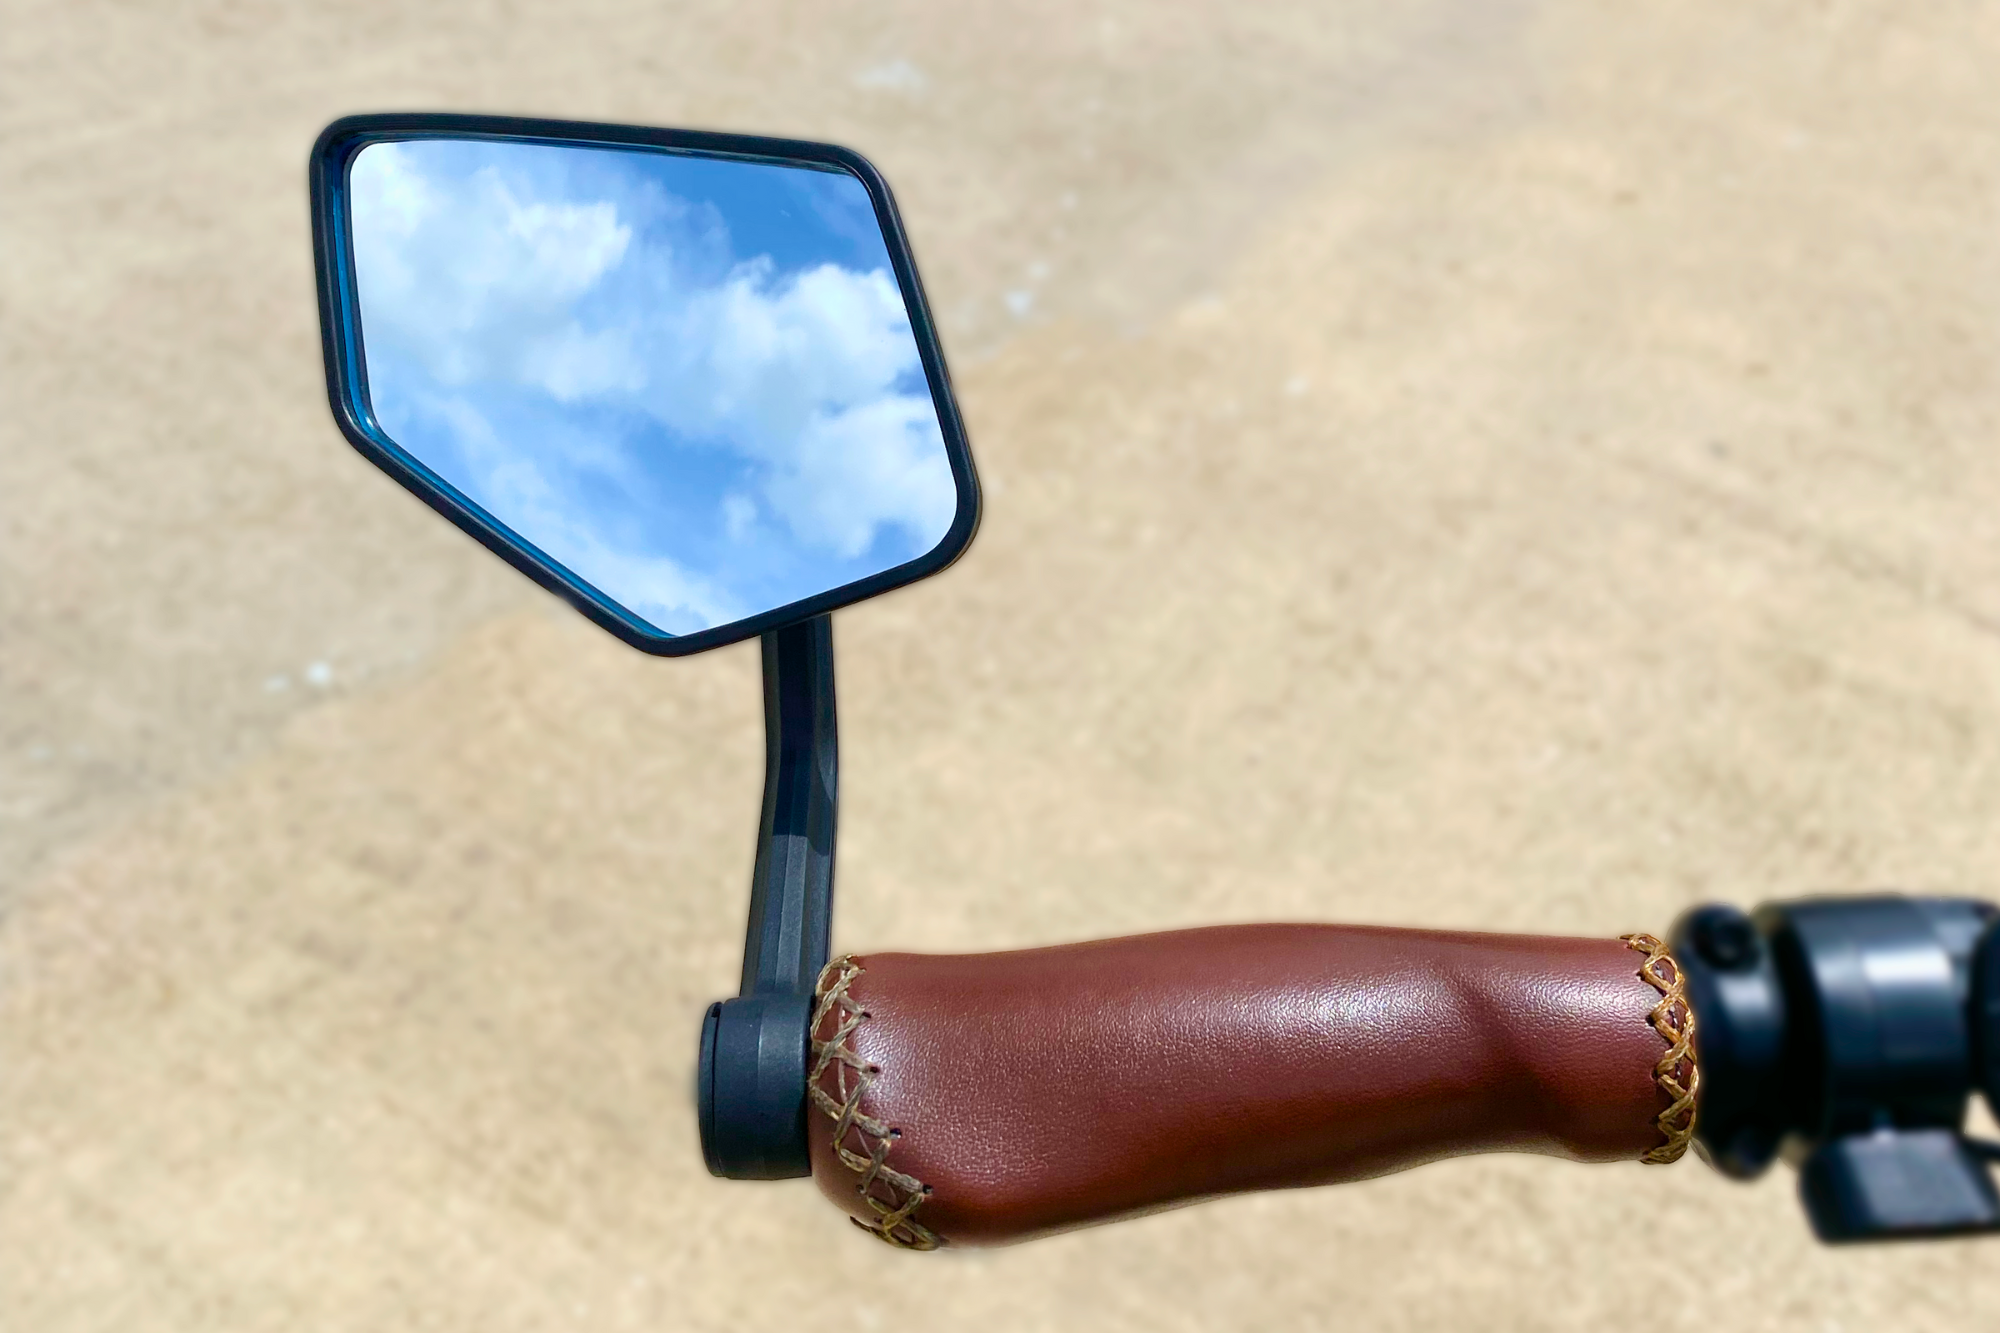 Enjoy a safe ride. This ebike mirror will ensure you can always see what’s going on behind you. With a wider field of view, you’ll be able to drive more comfortably and safely.